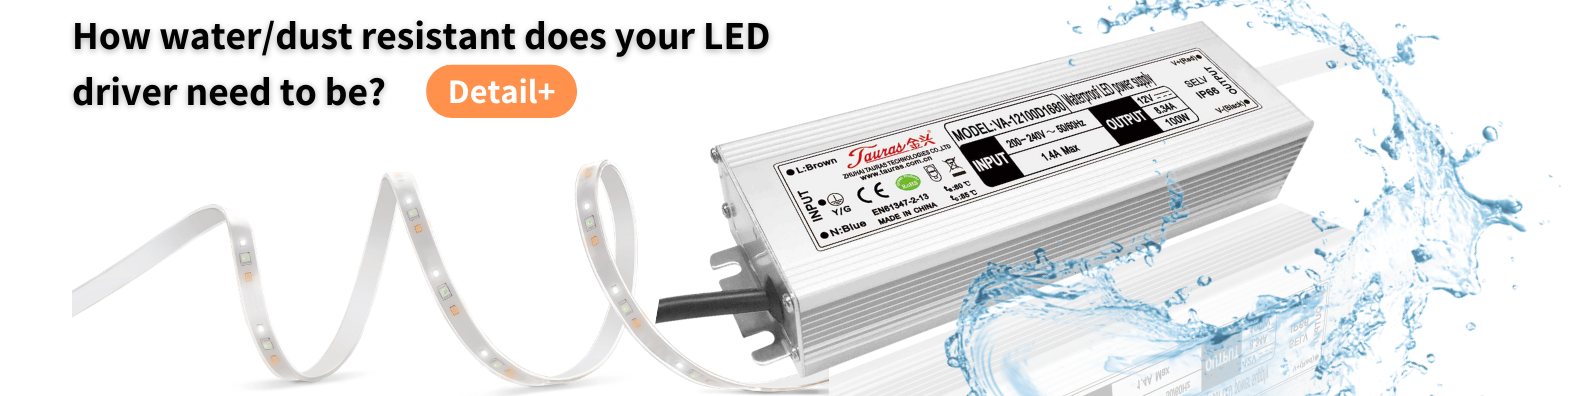 How waterdust resistant does your LED driver need to be2